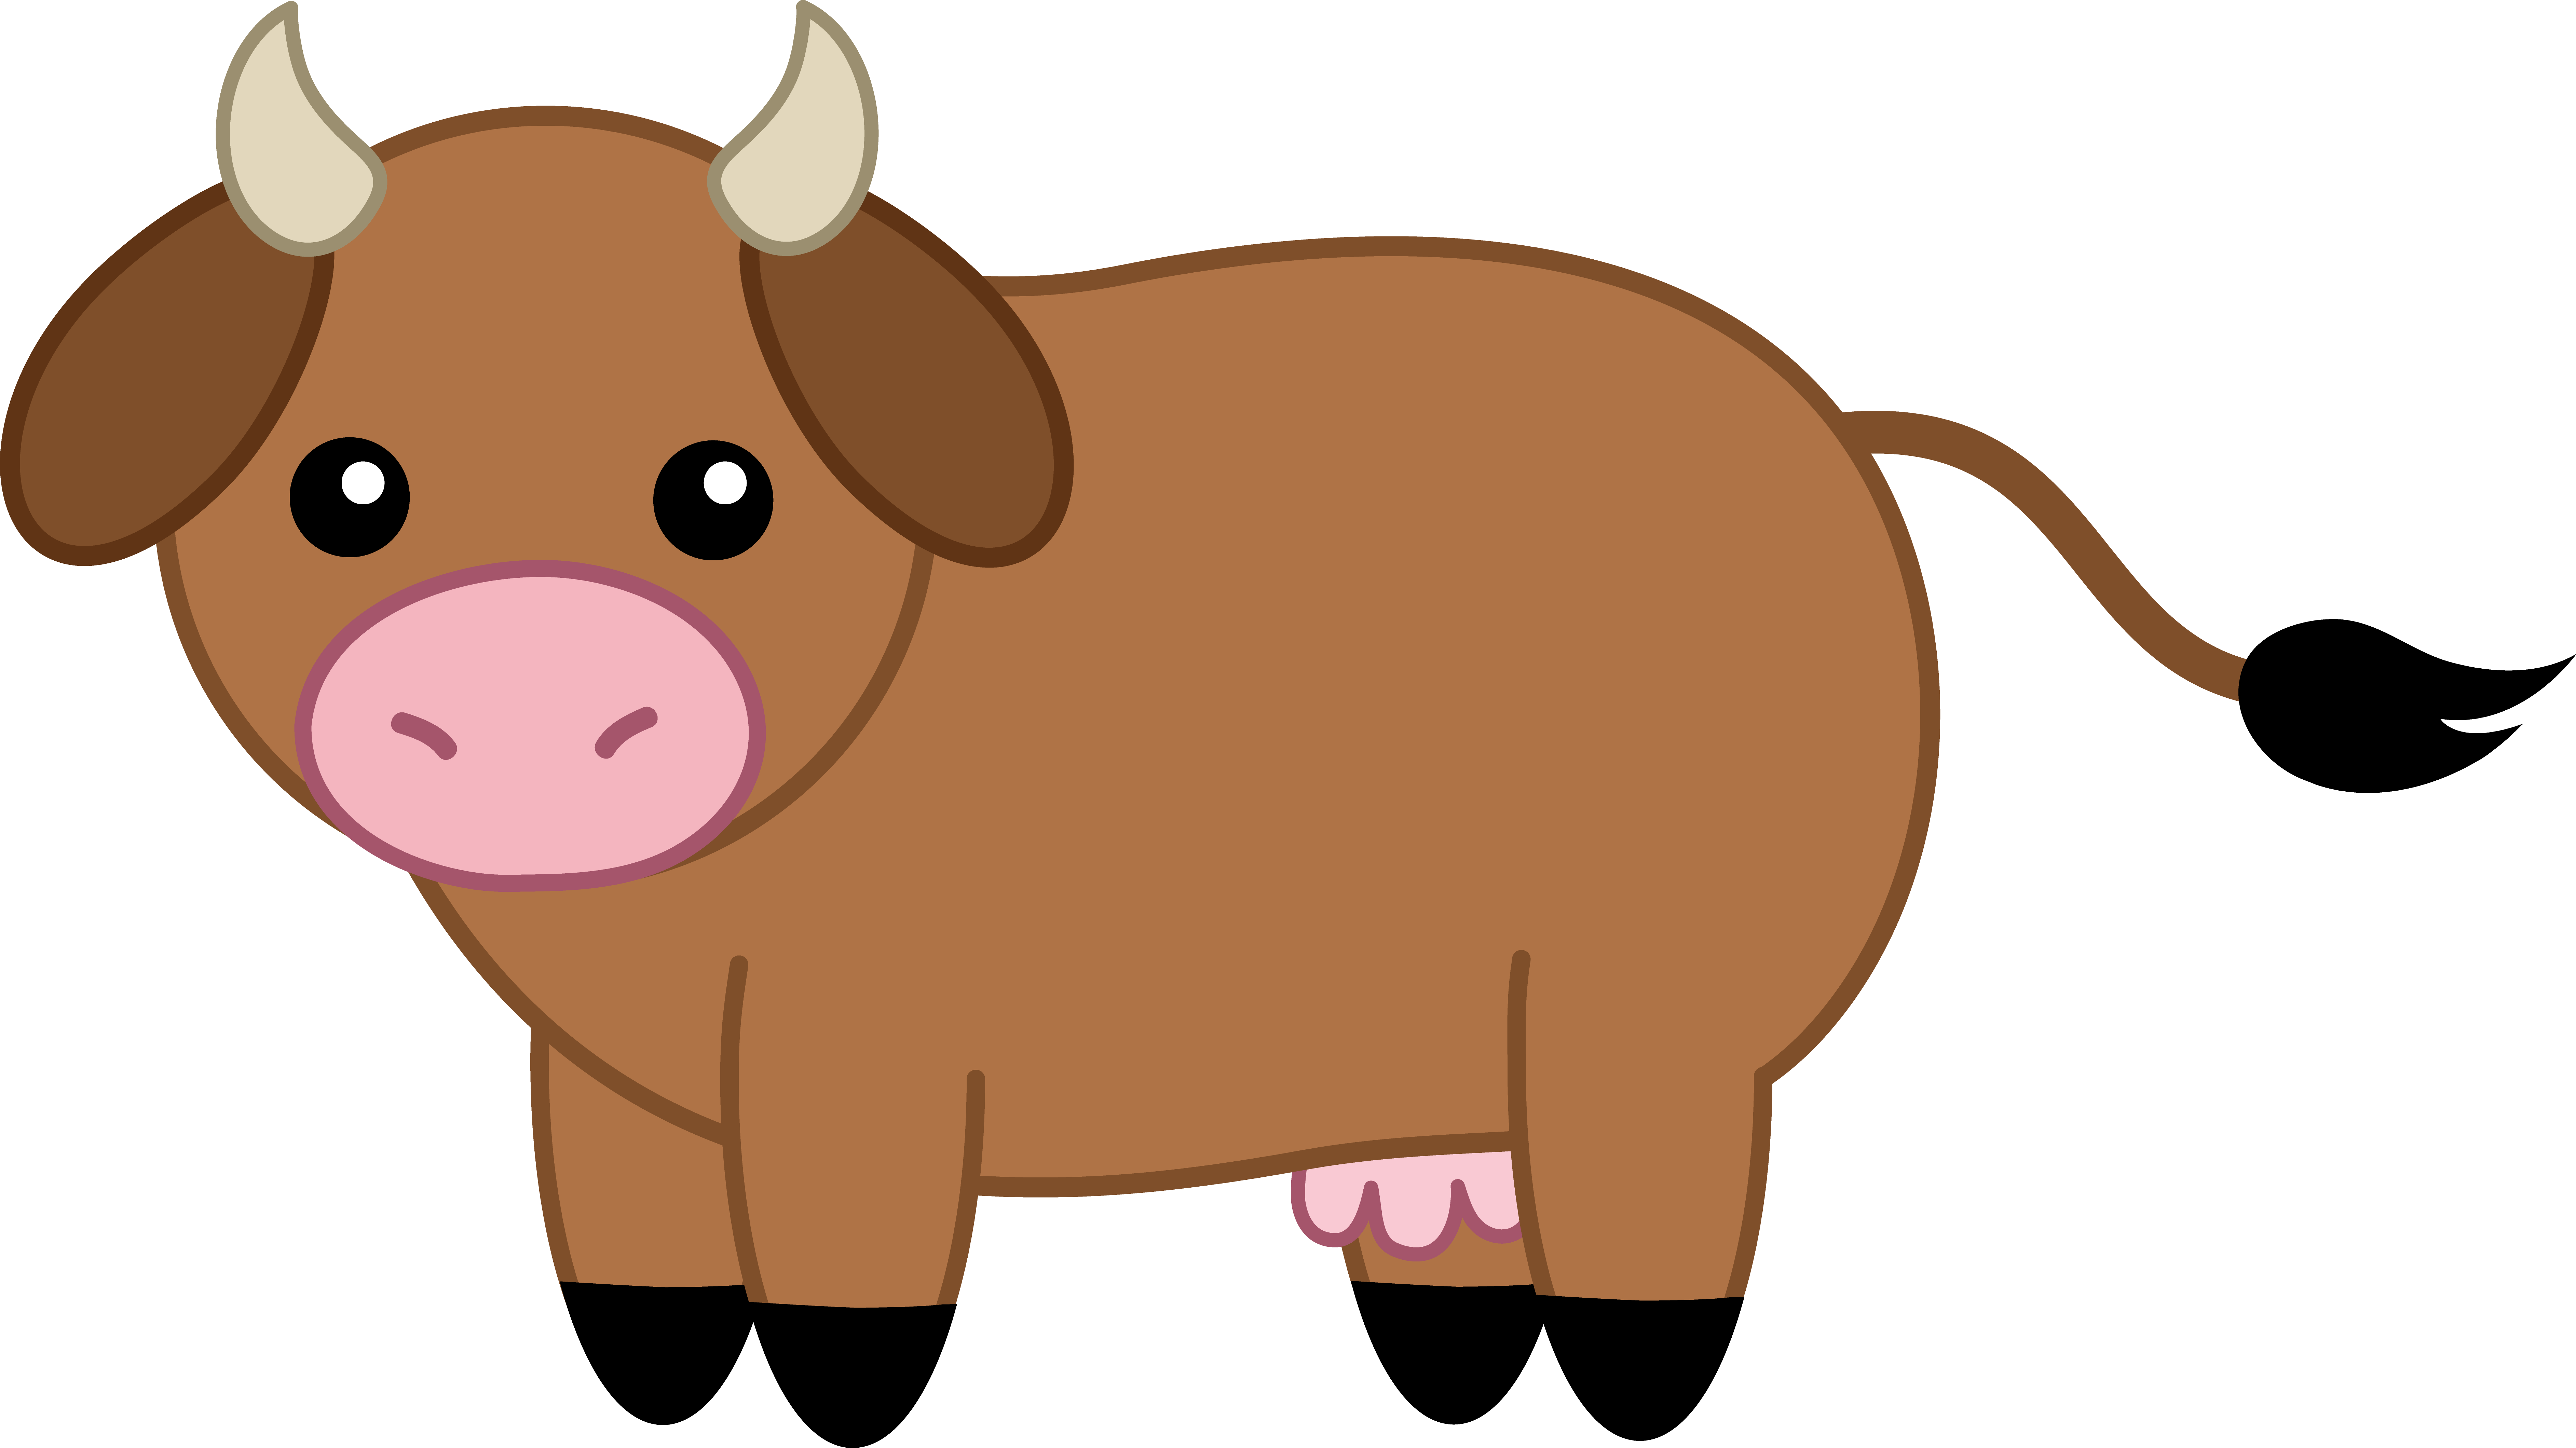 Clipart free cow. Little brown panda images